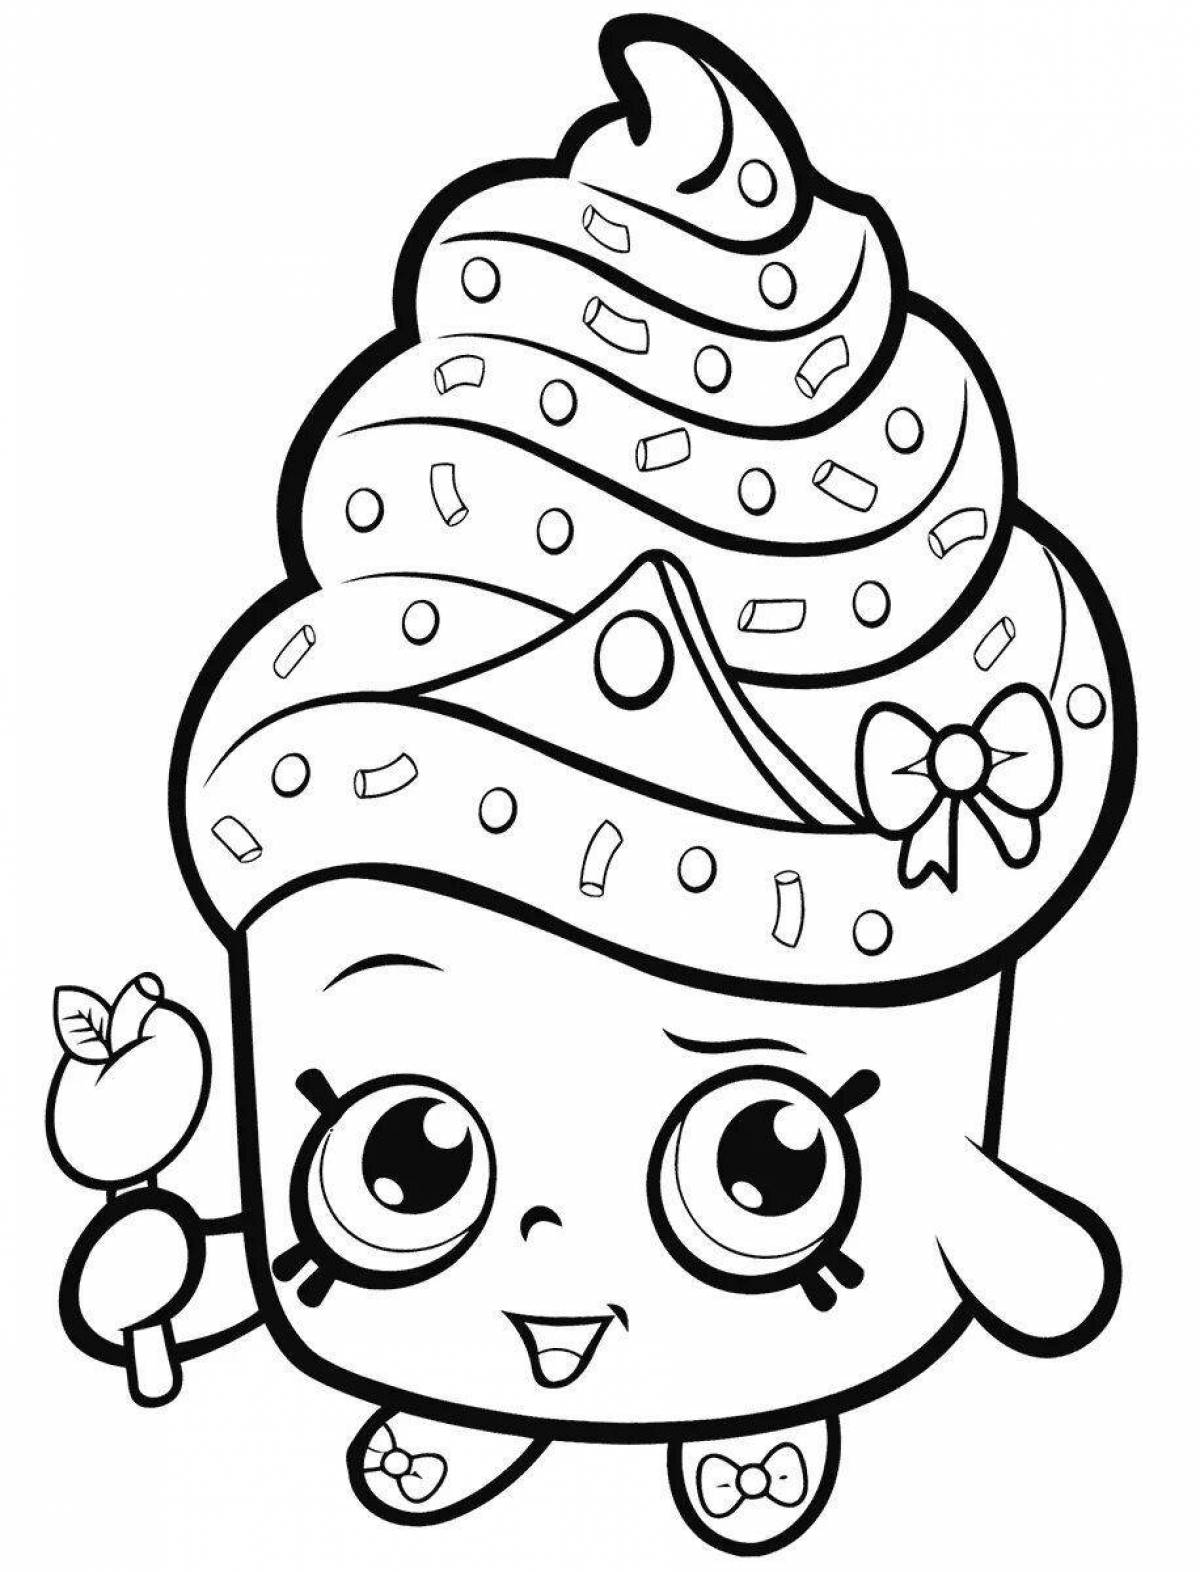 Amazing shopkins coloring pages for girls